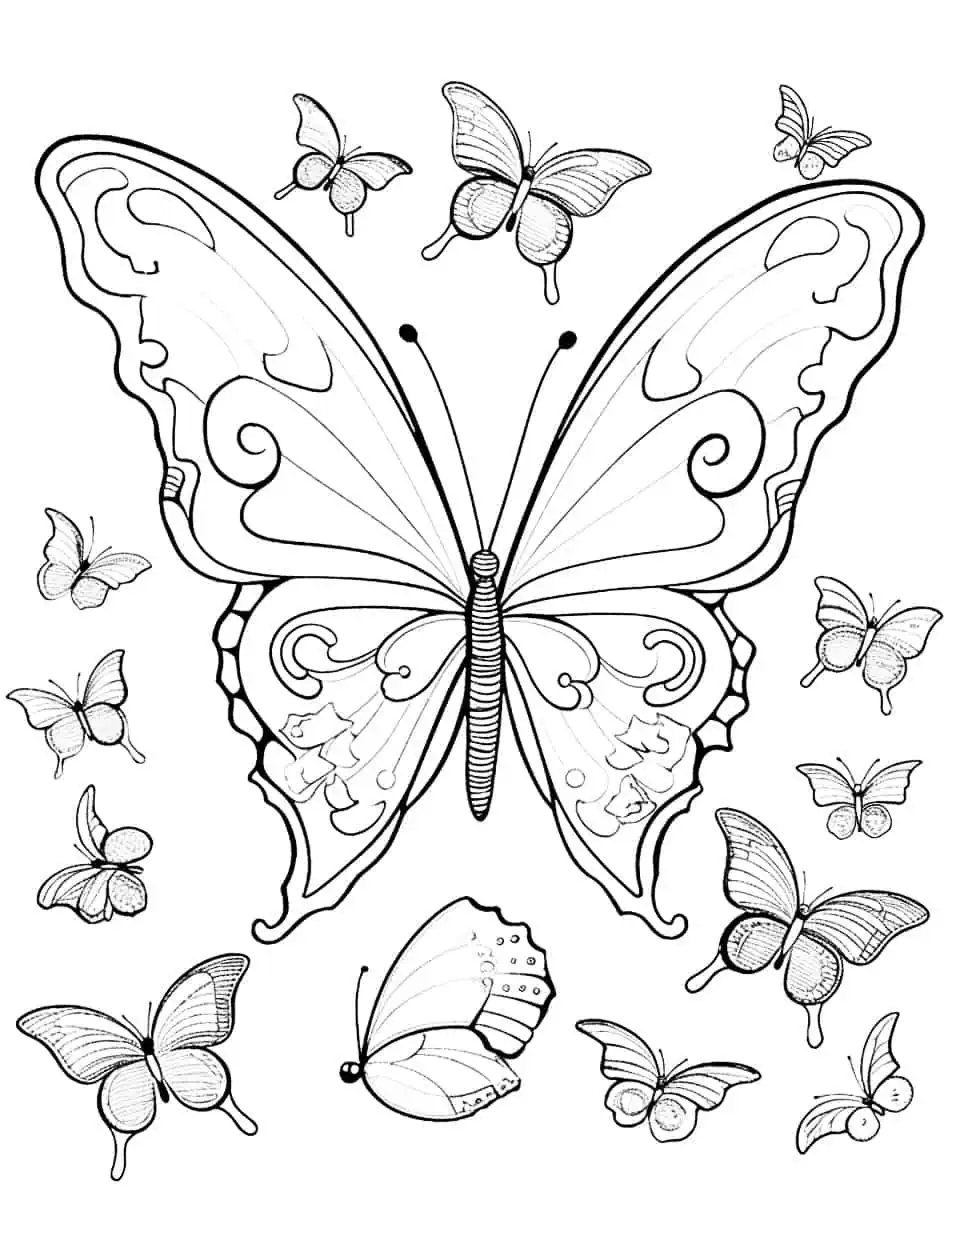 Majestic Migration Butterfly Coloring Page - A coloring page showcasing a flock of butterflies on a migratory journey.